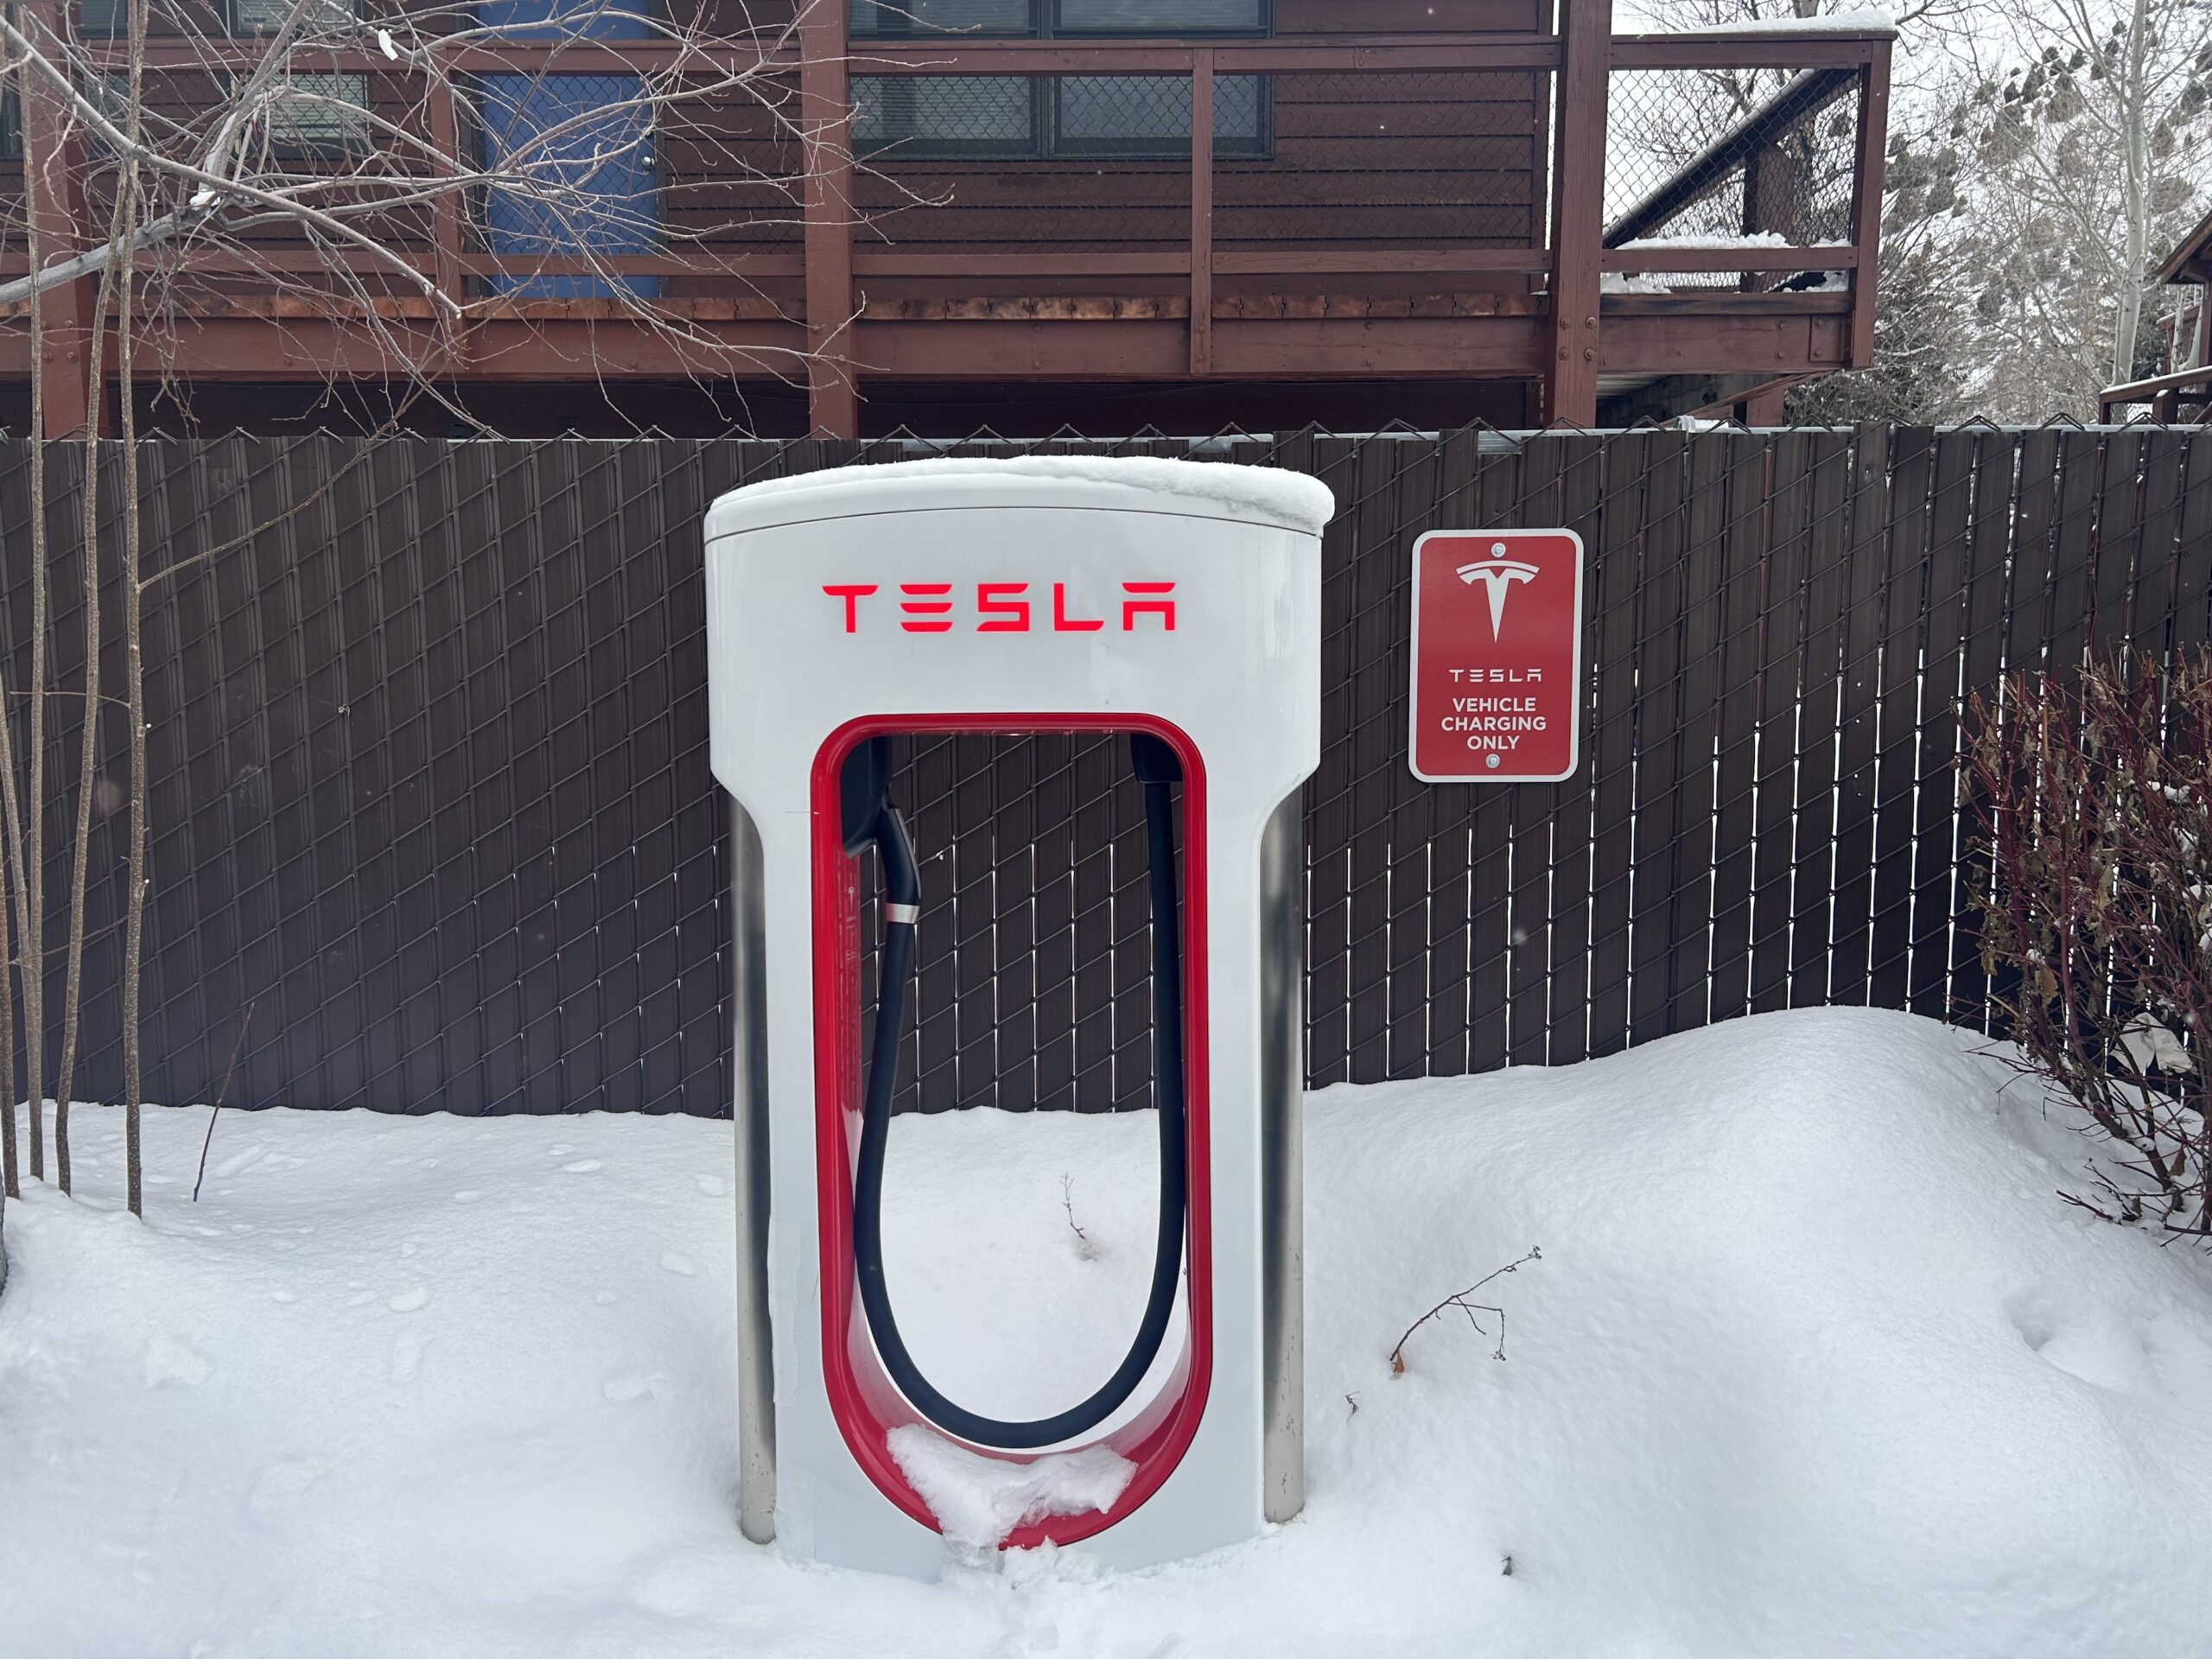 Tesla Supercharger in Jackson, WY